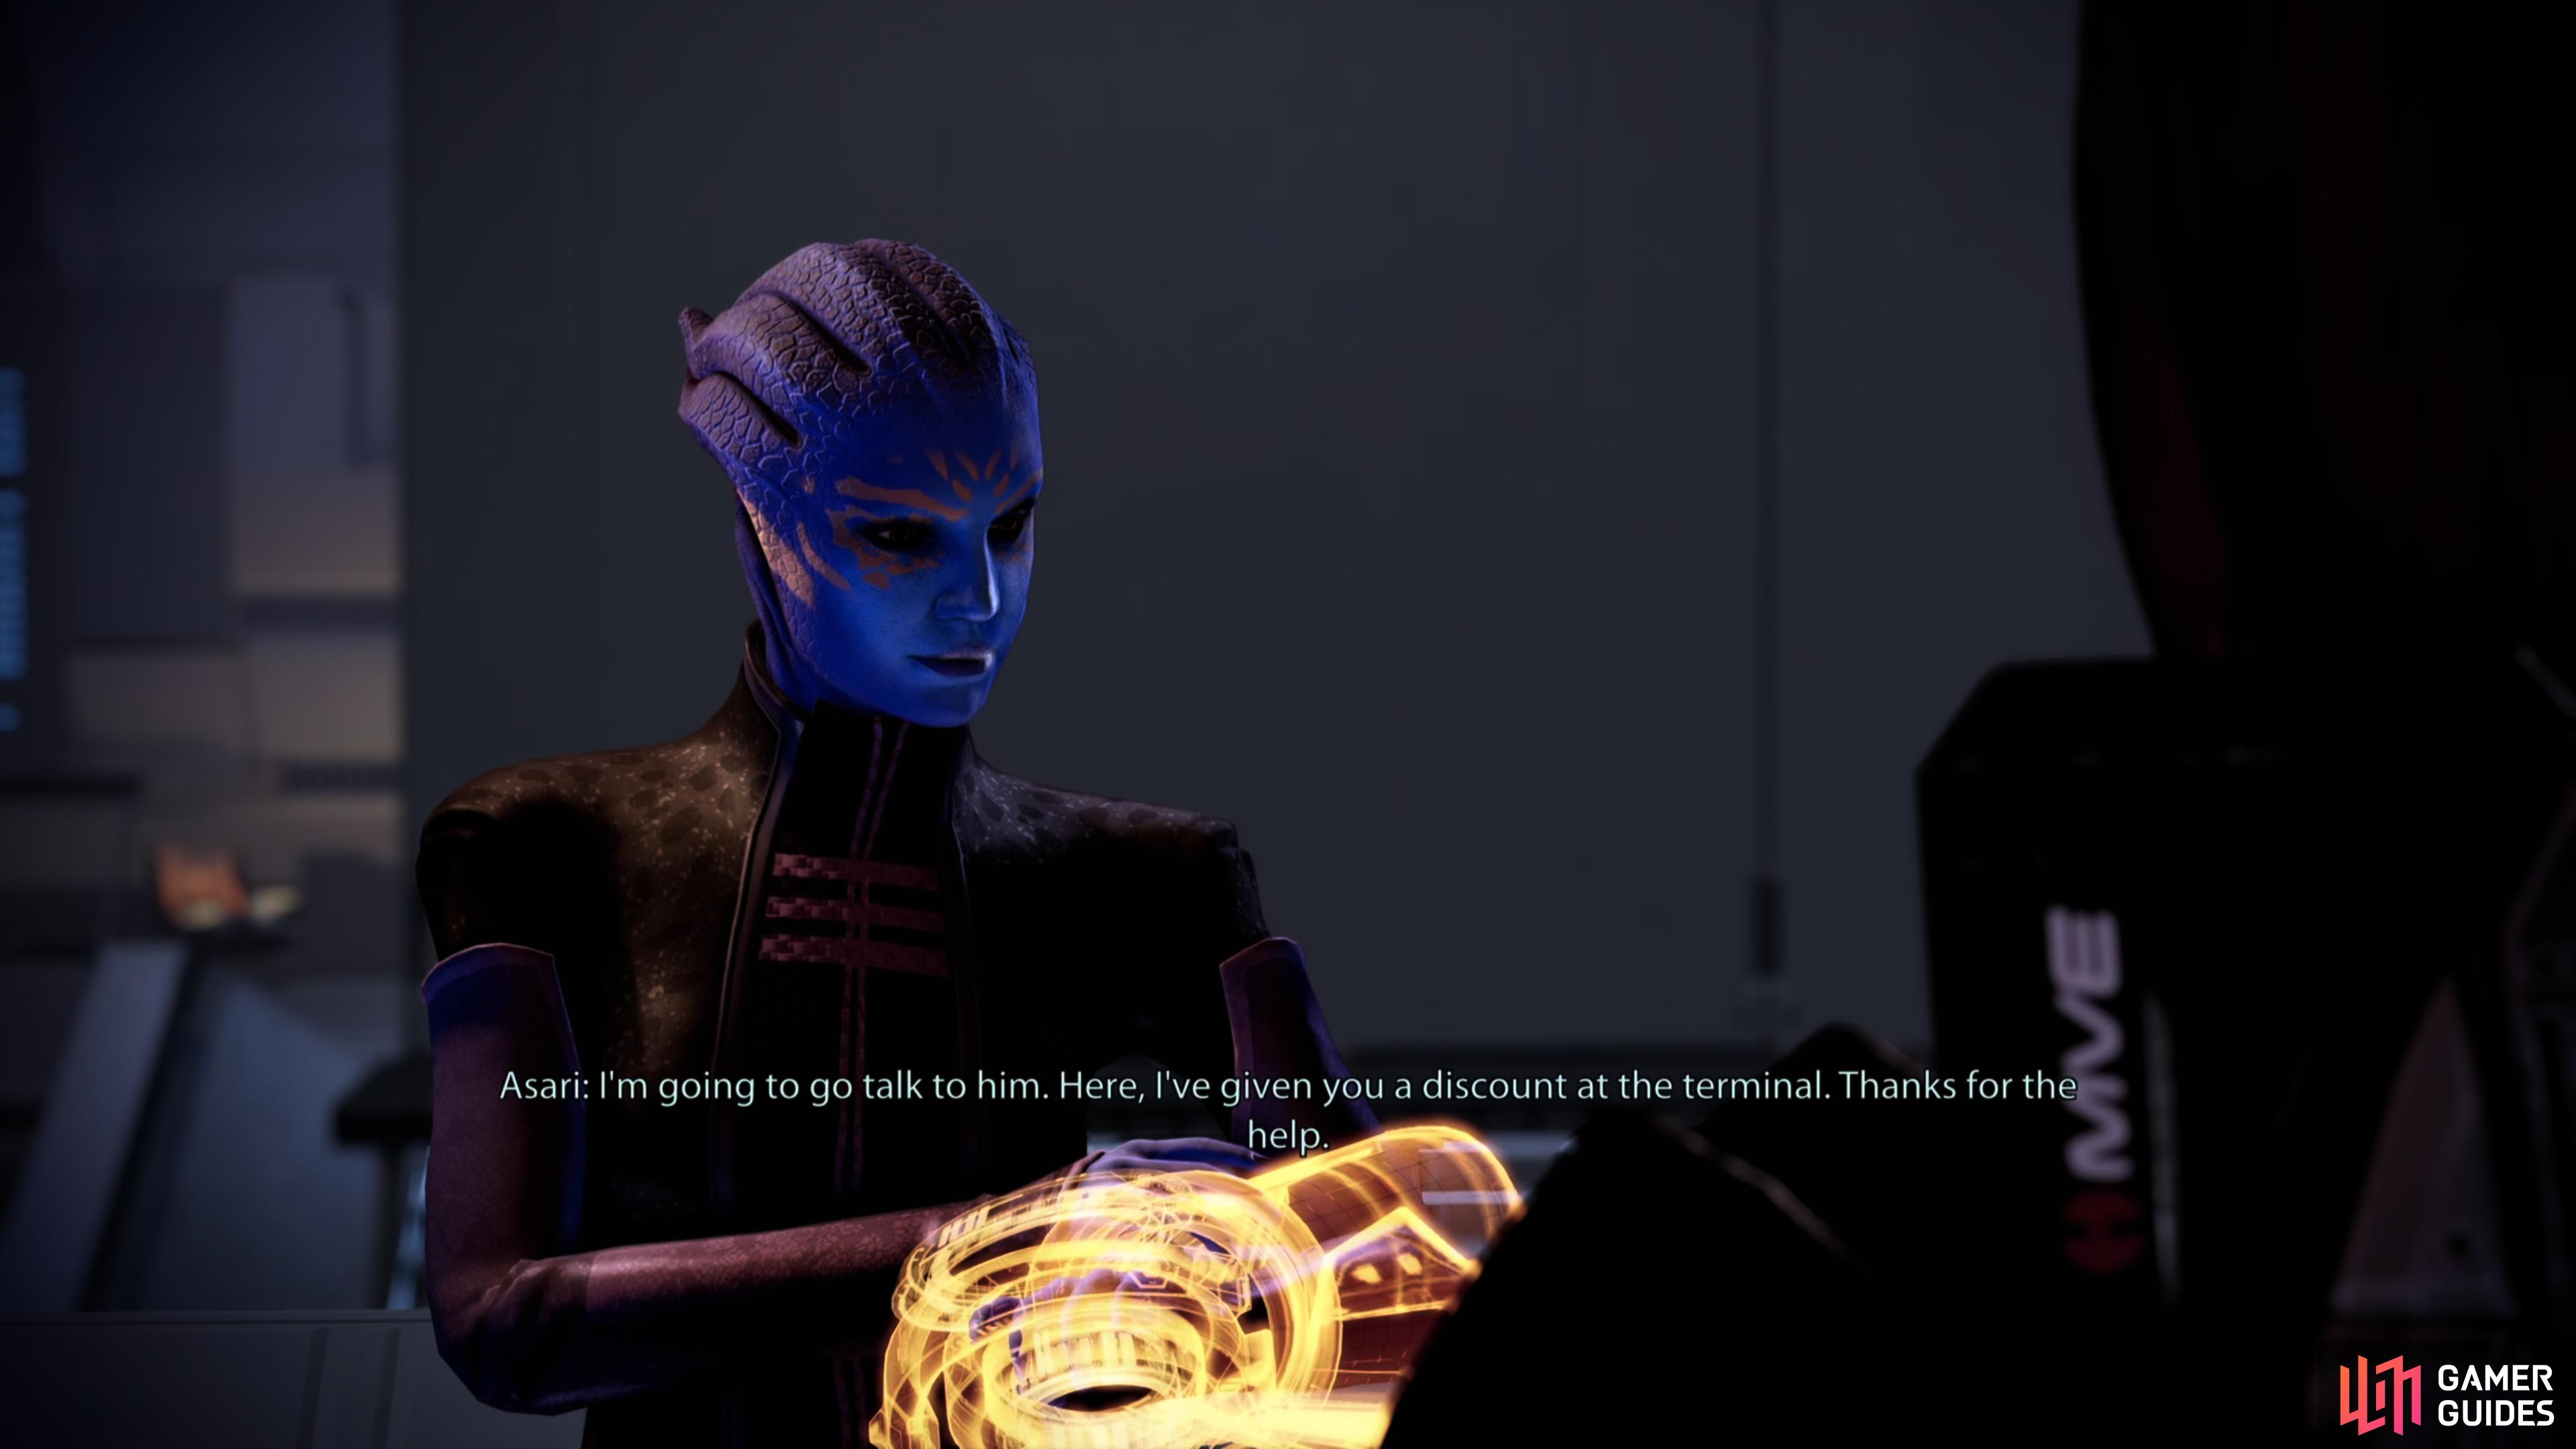 Convince the asari proprietress of the “Memories of Illium” kiosk to make a decision regarding her boyfriend to complete this assignment.